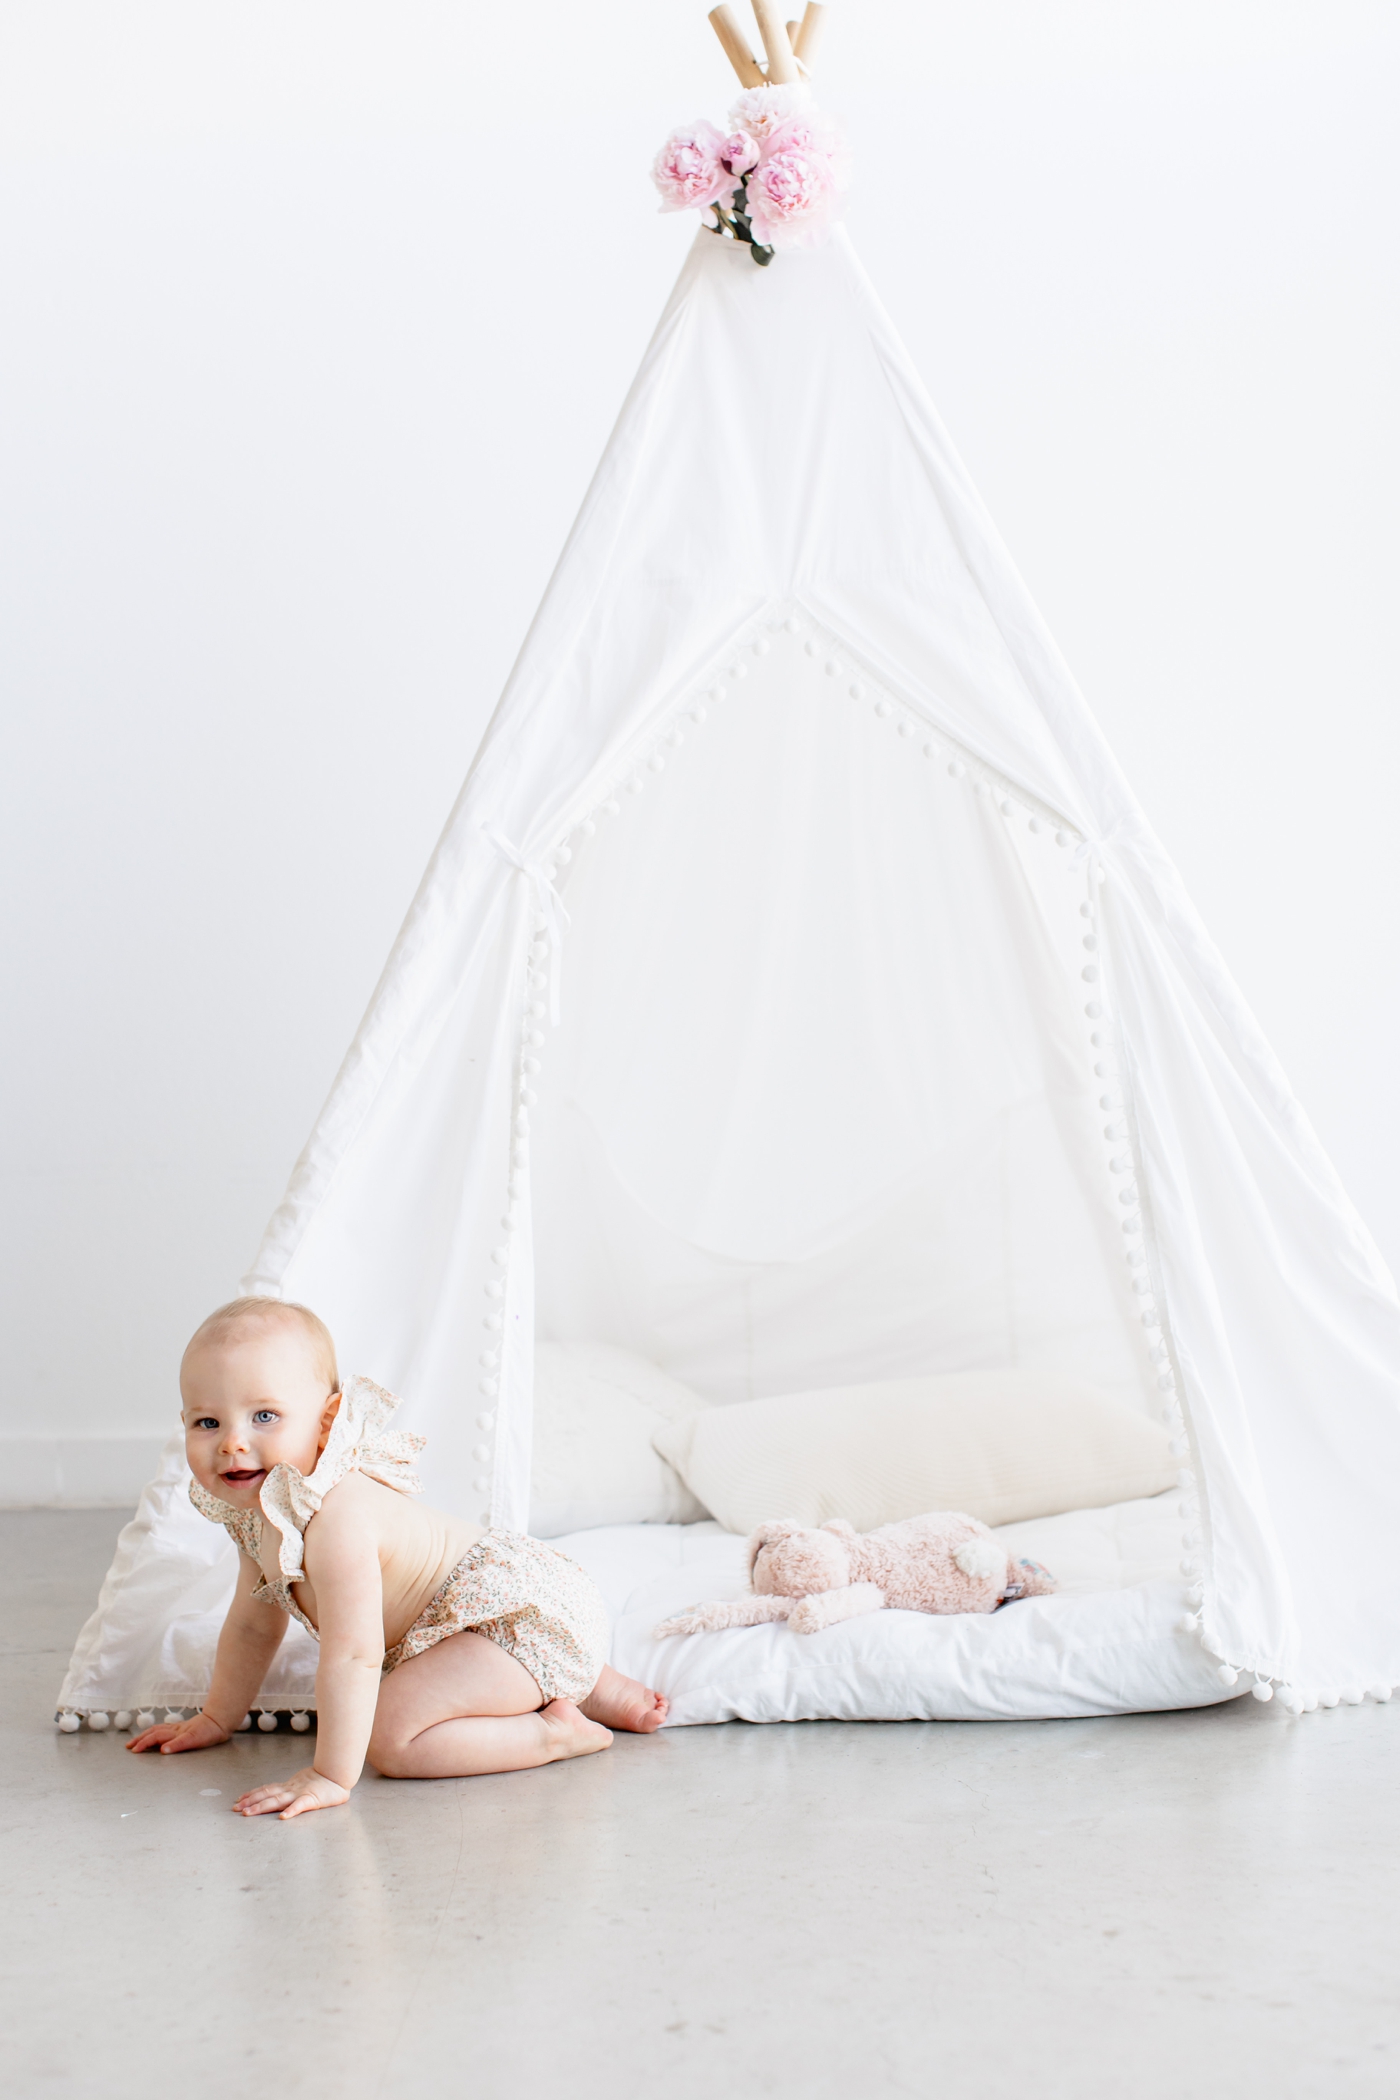 Toddler crawling out of teepee during studio milestone session. Photo by Sana Ahmed Photography.